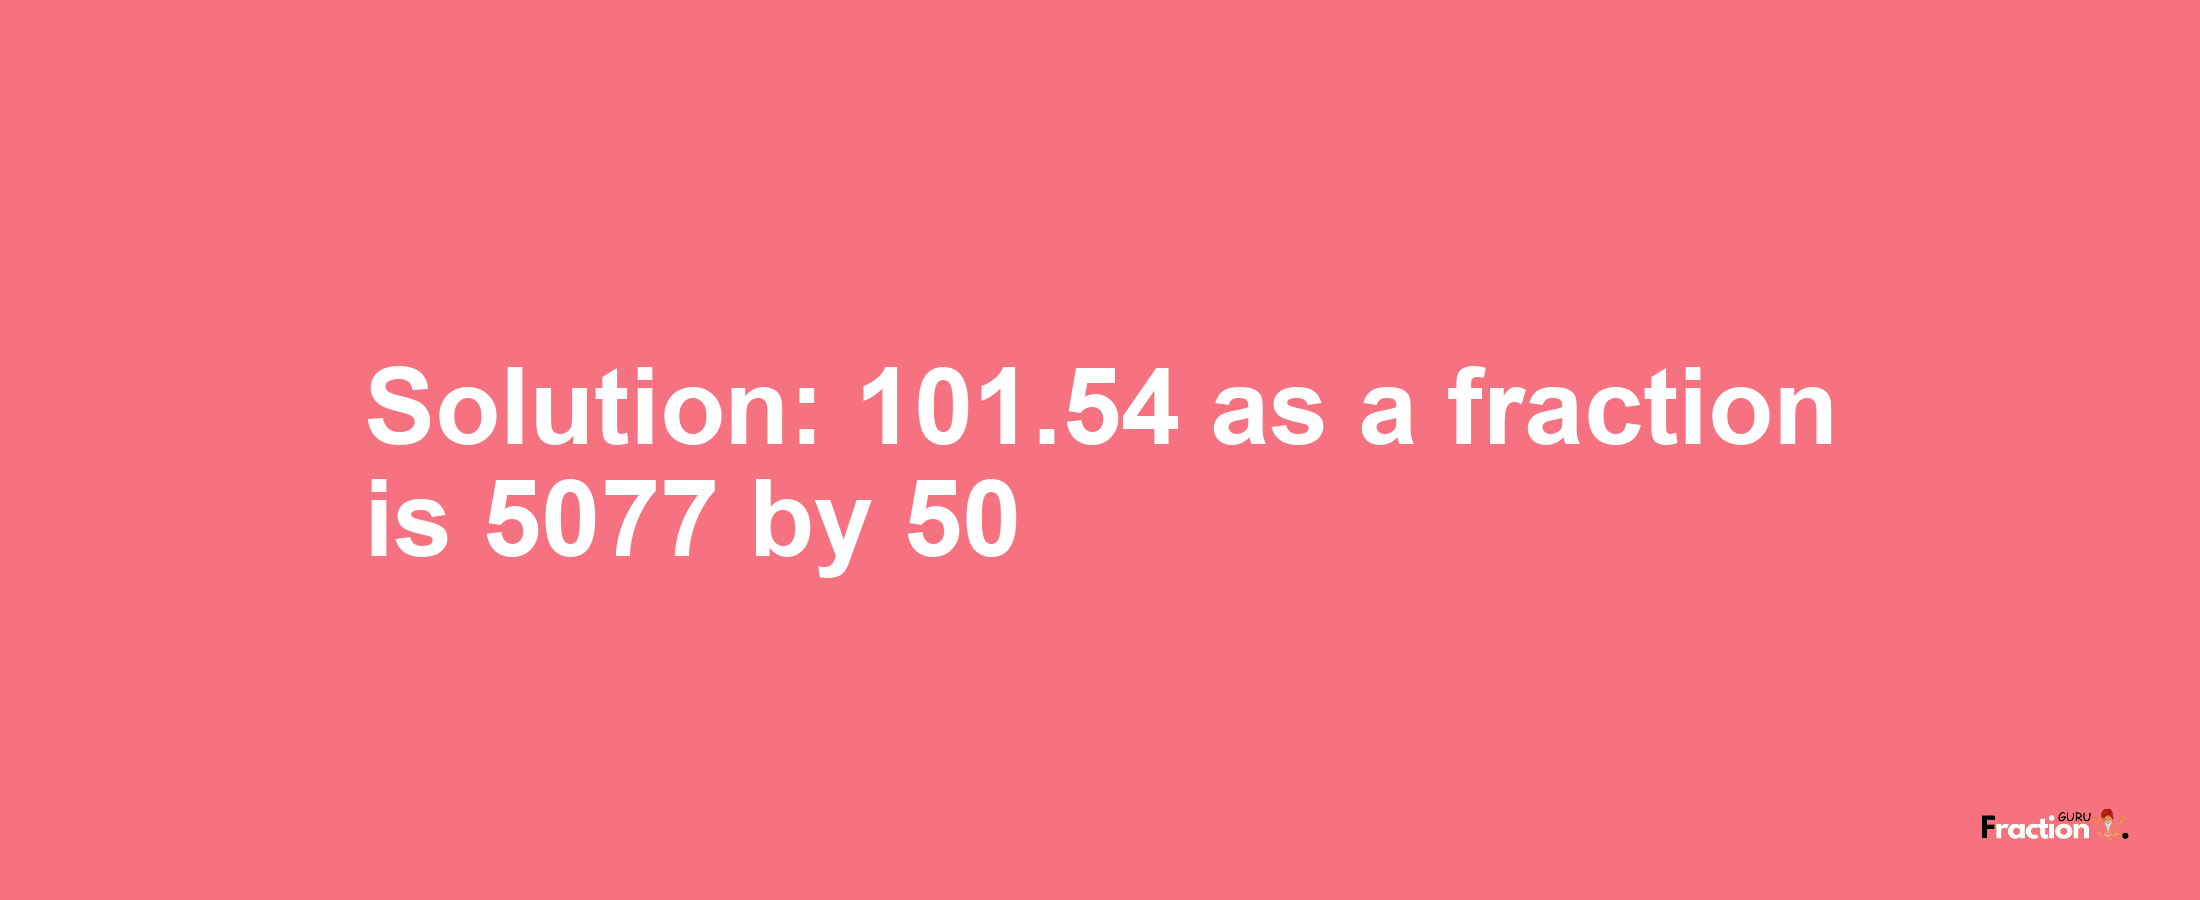 Solution:101.54 as a fraction is 5077/50